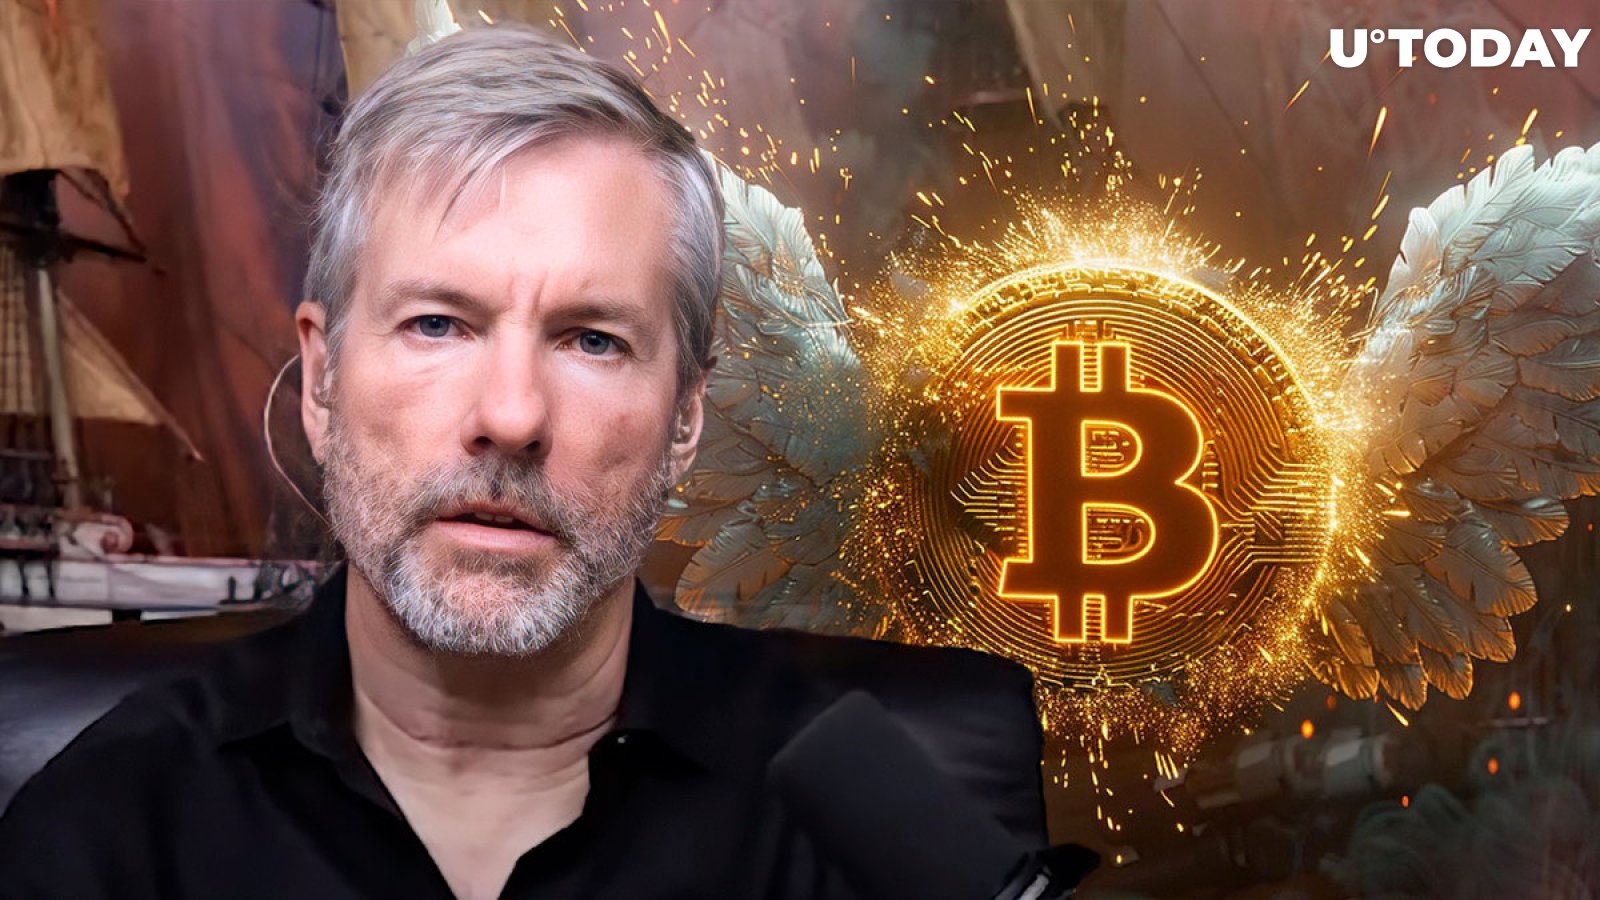 'Divine' Bitcoin Message Issued by Michael Saylor Leaves Community Pondering